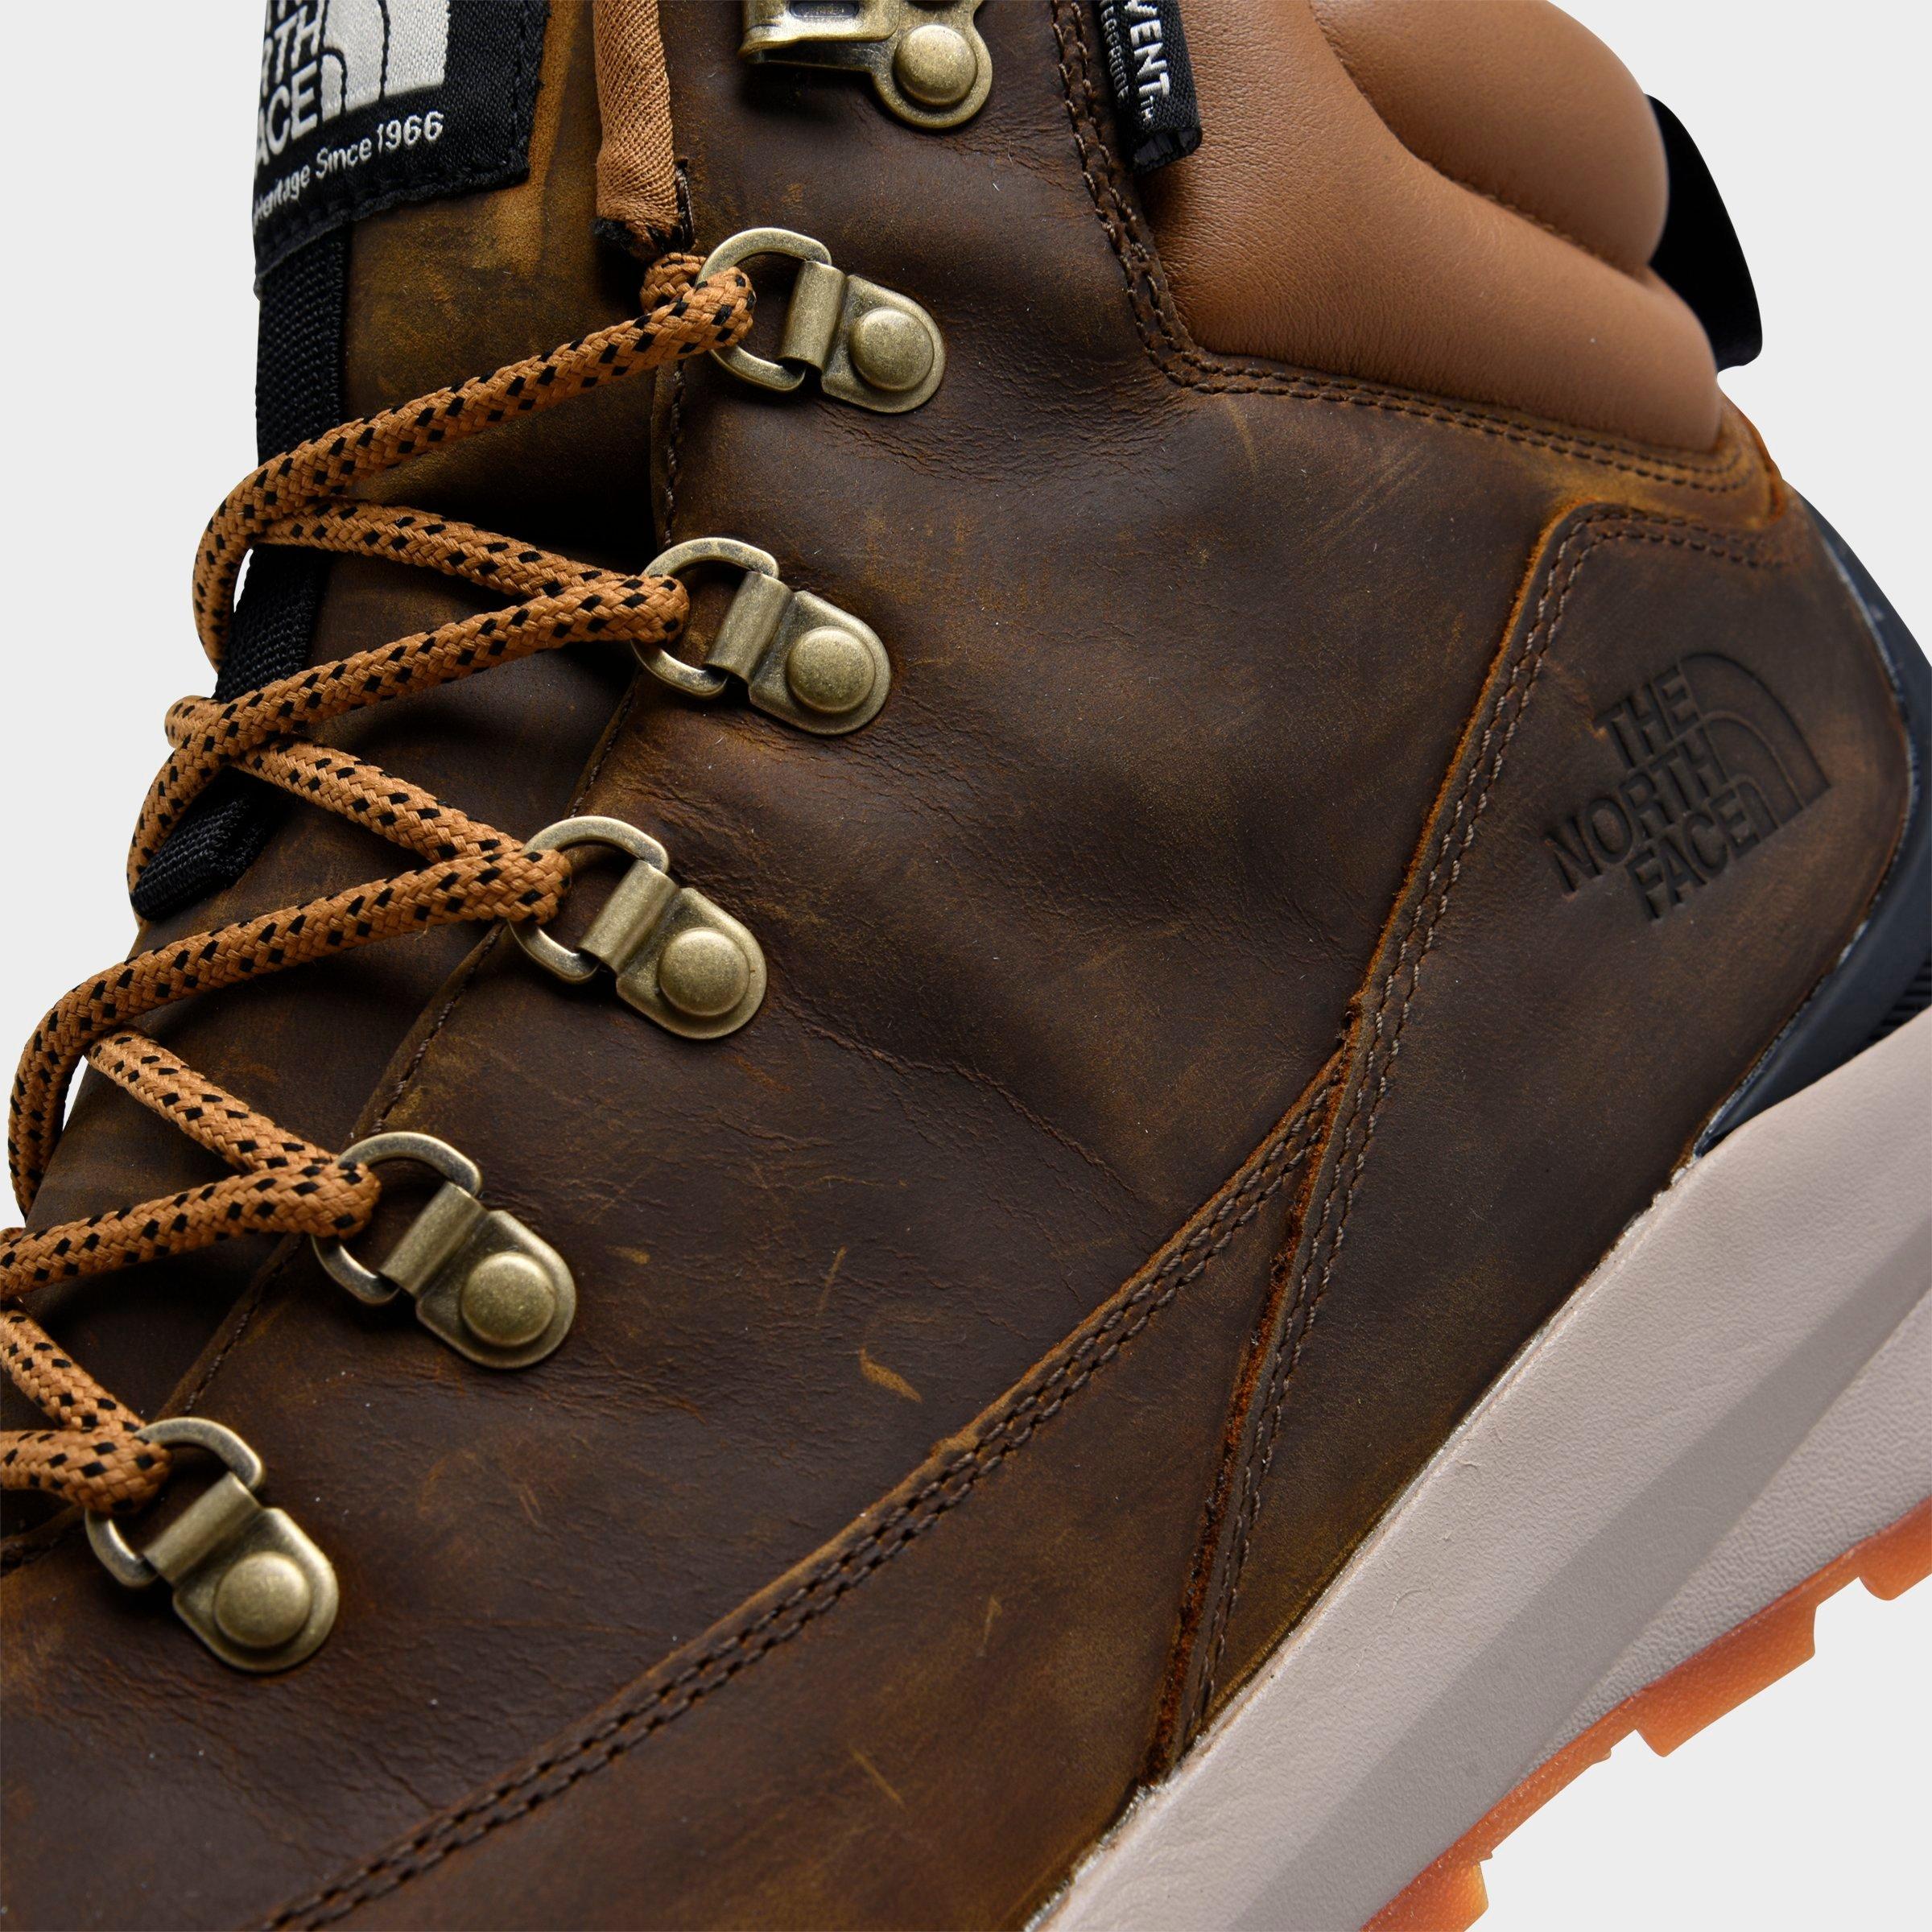 north face mens waterproof boots